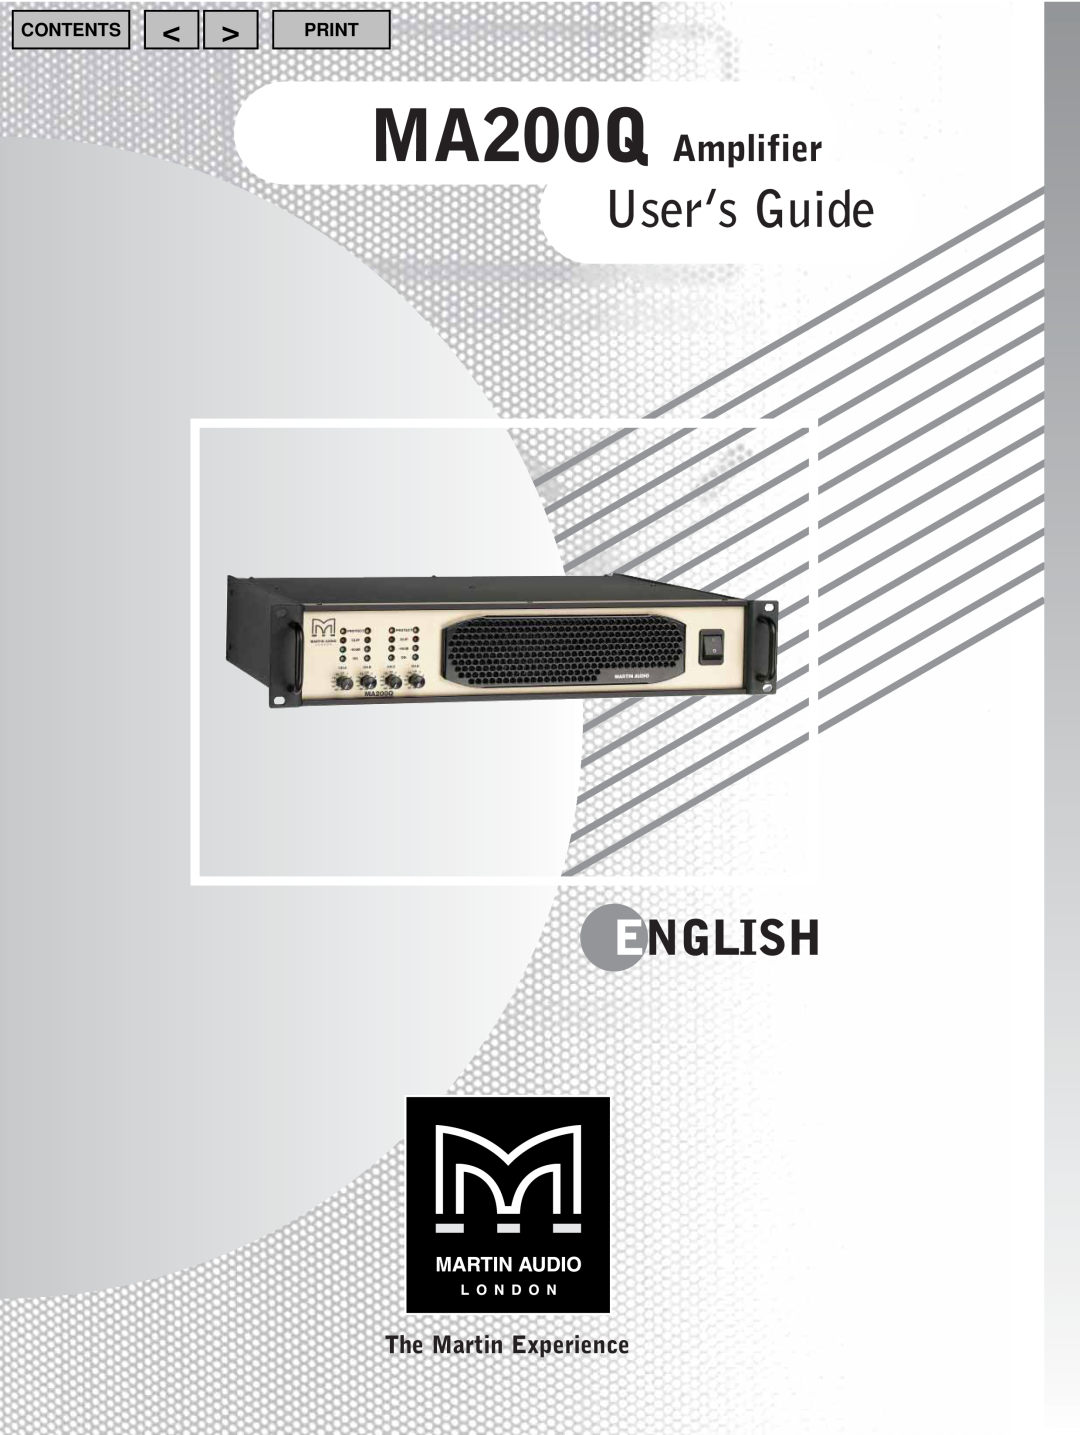 Martin Audio User’s Guide, English, MA200Q Amplifier, The Martin Experience, Contents, Print 